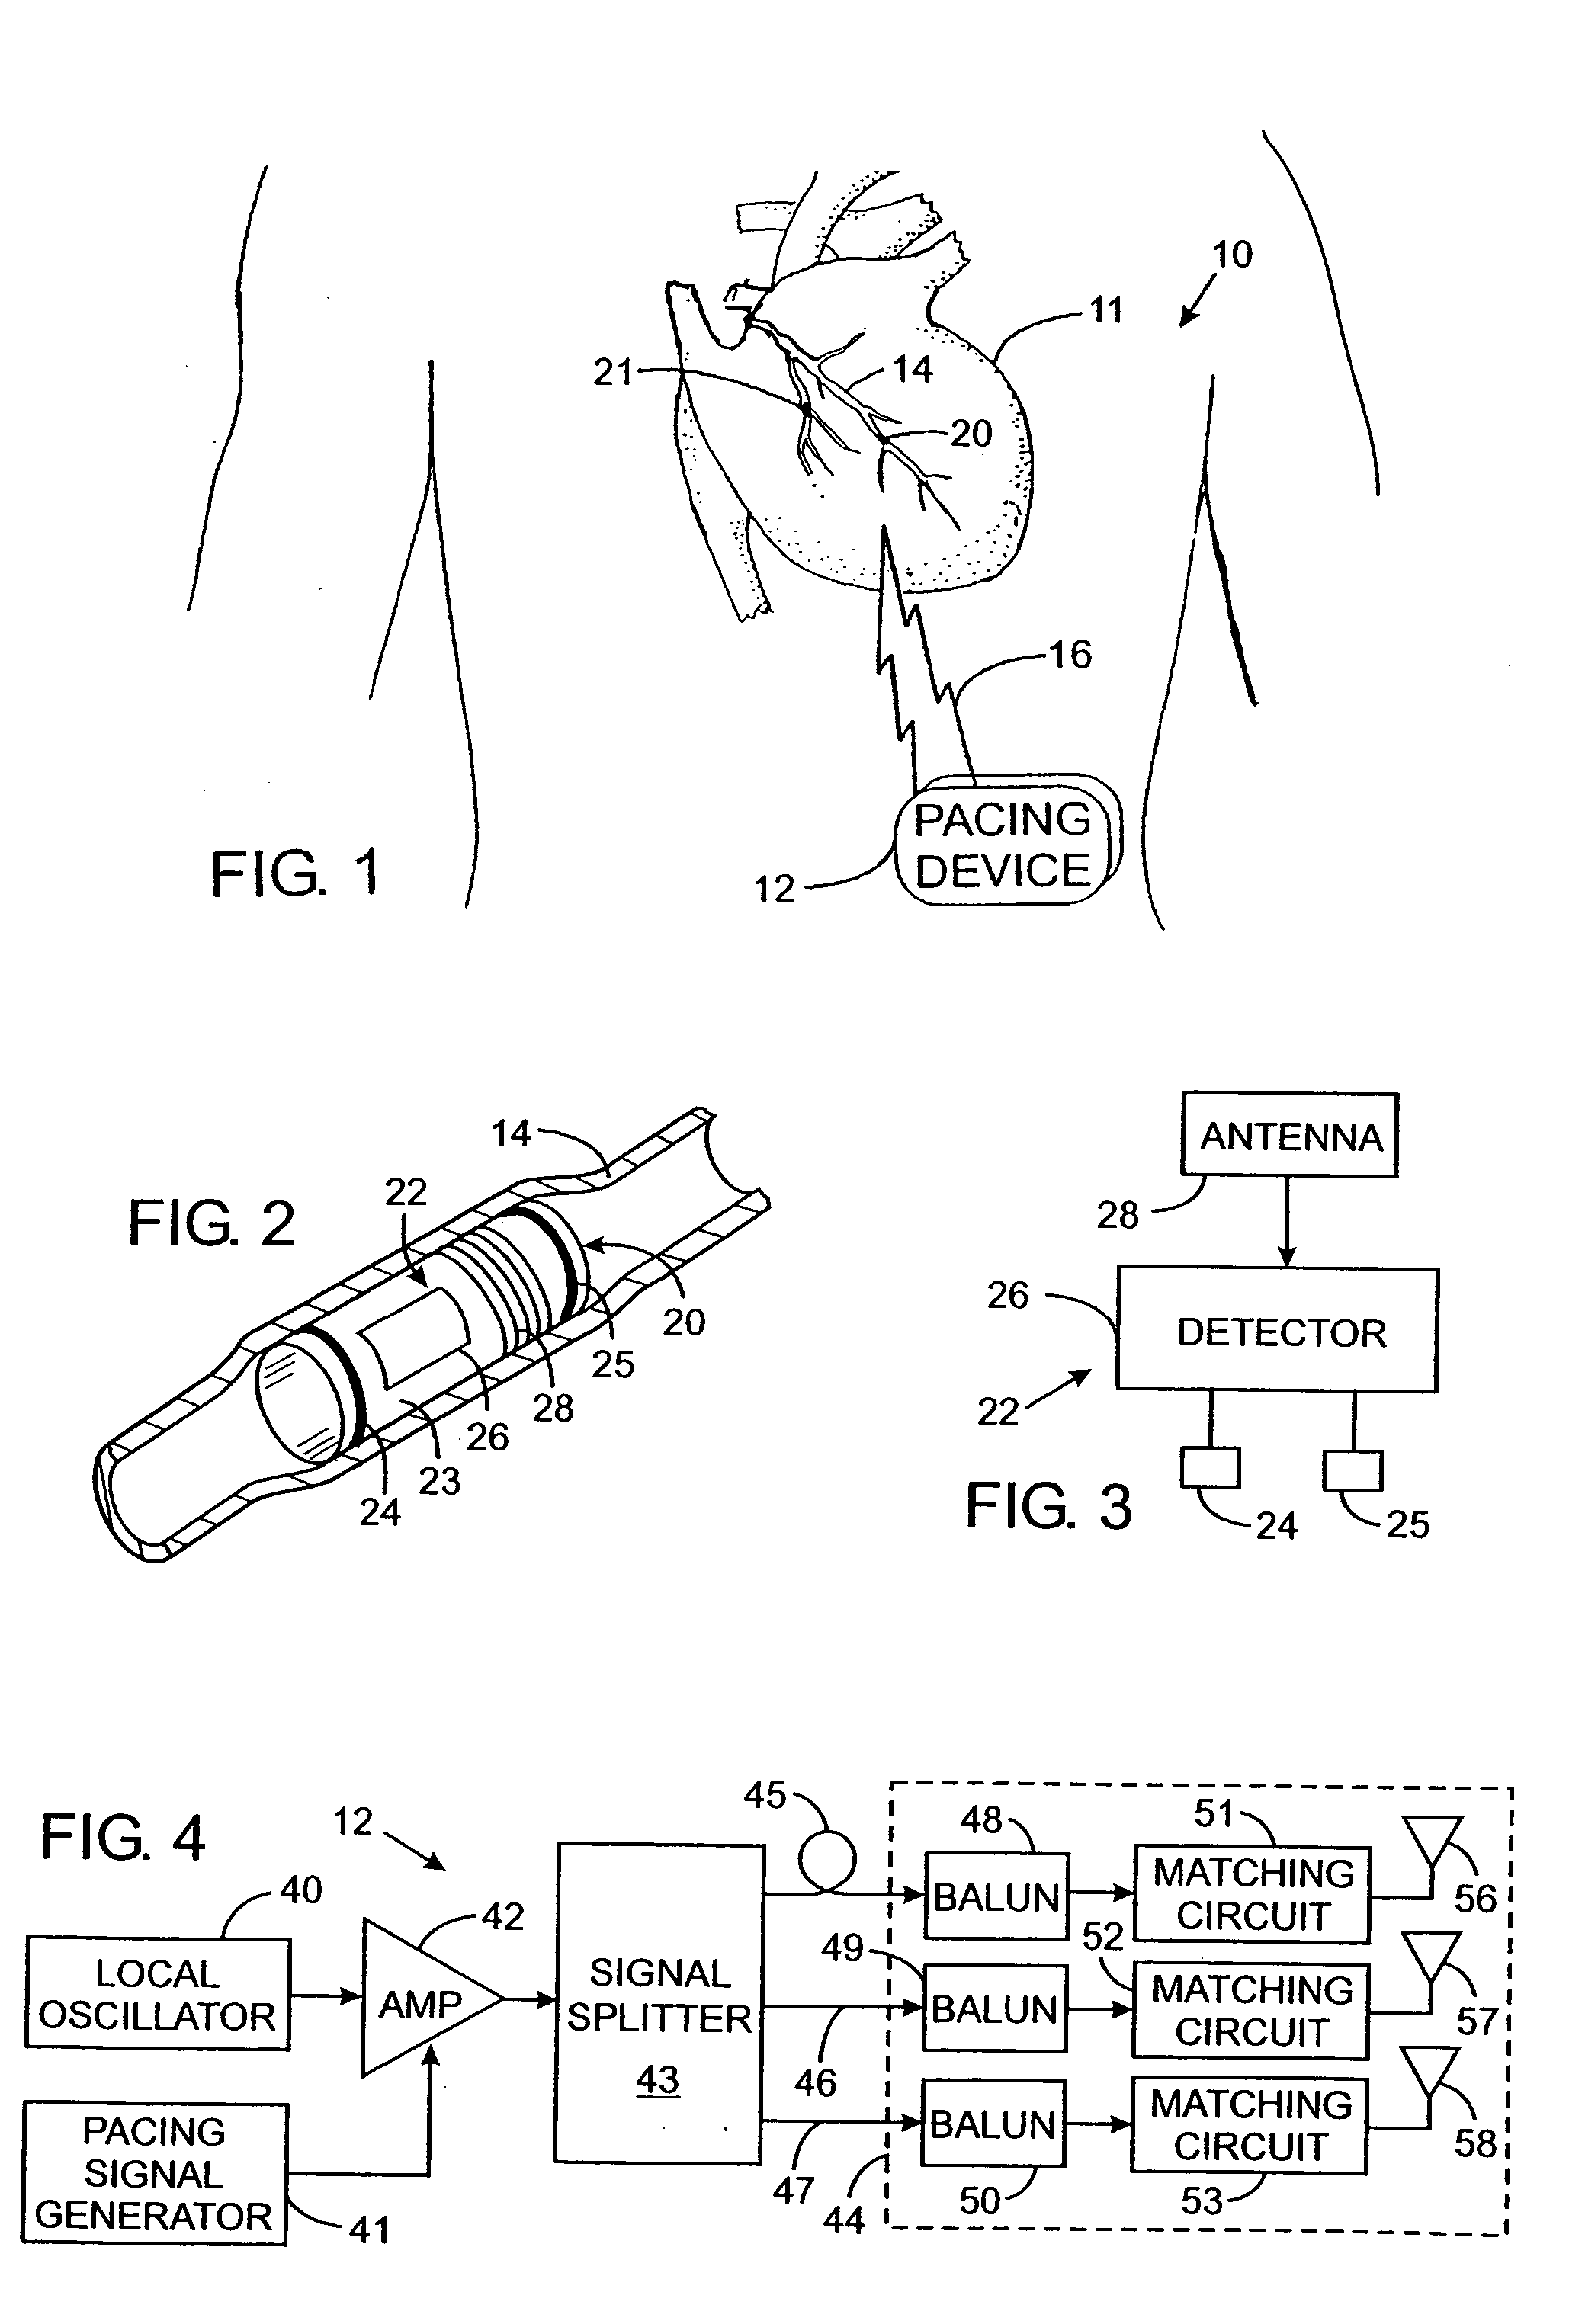 Omnidirectional antenna for wireless communication with implanted medical devices